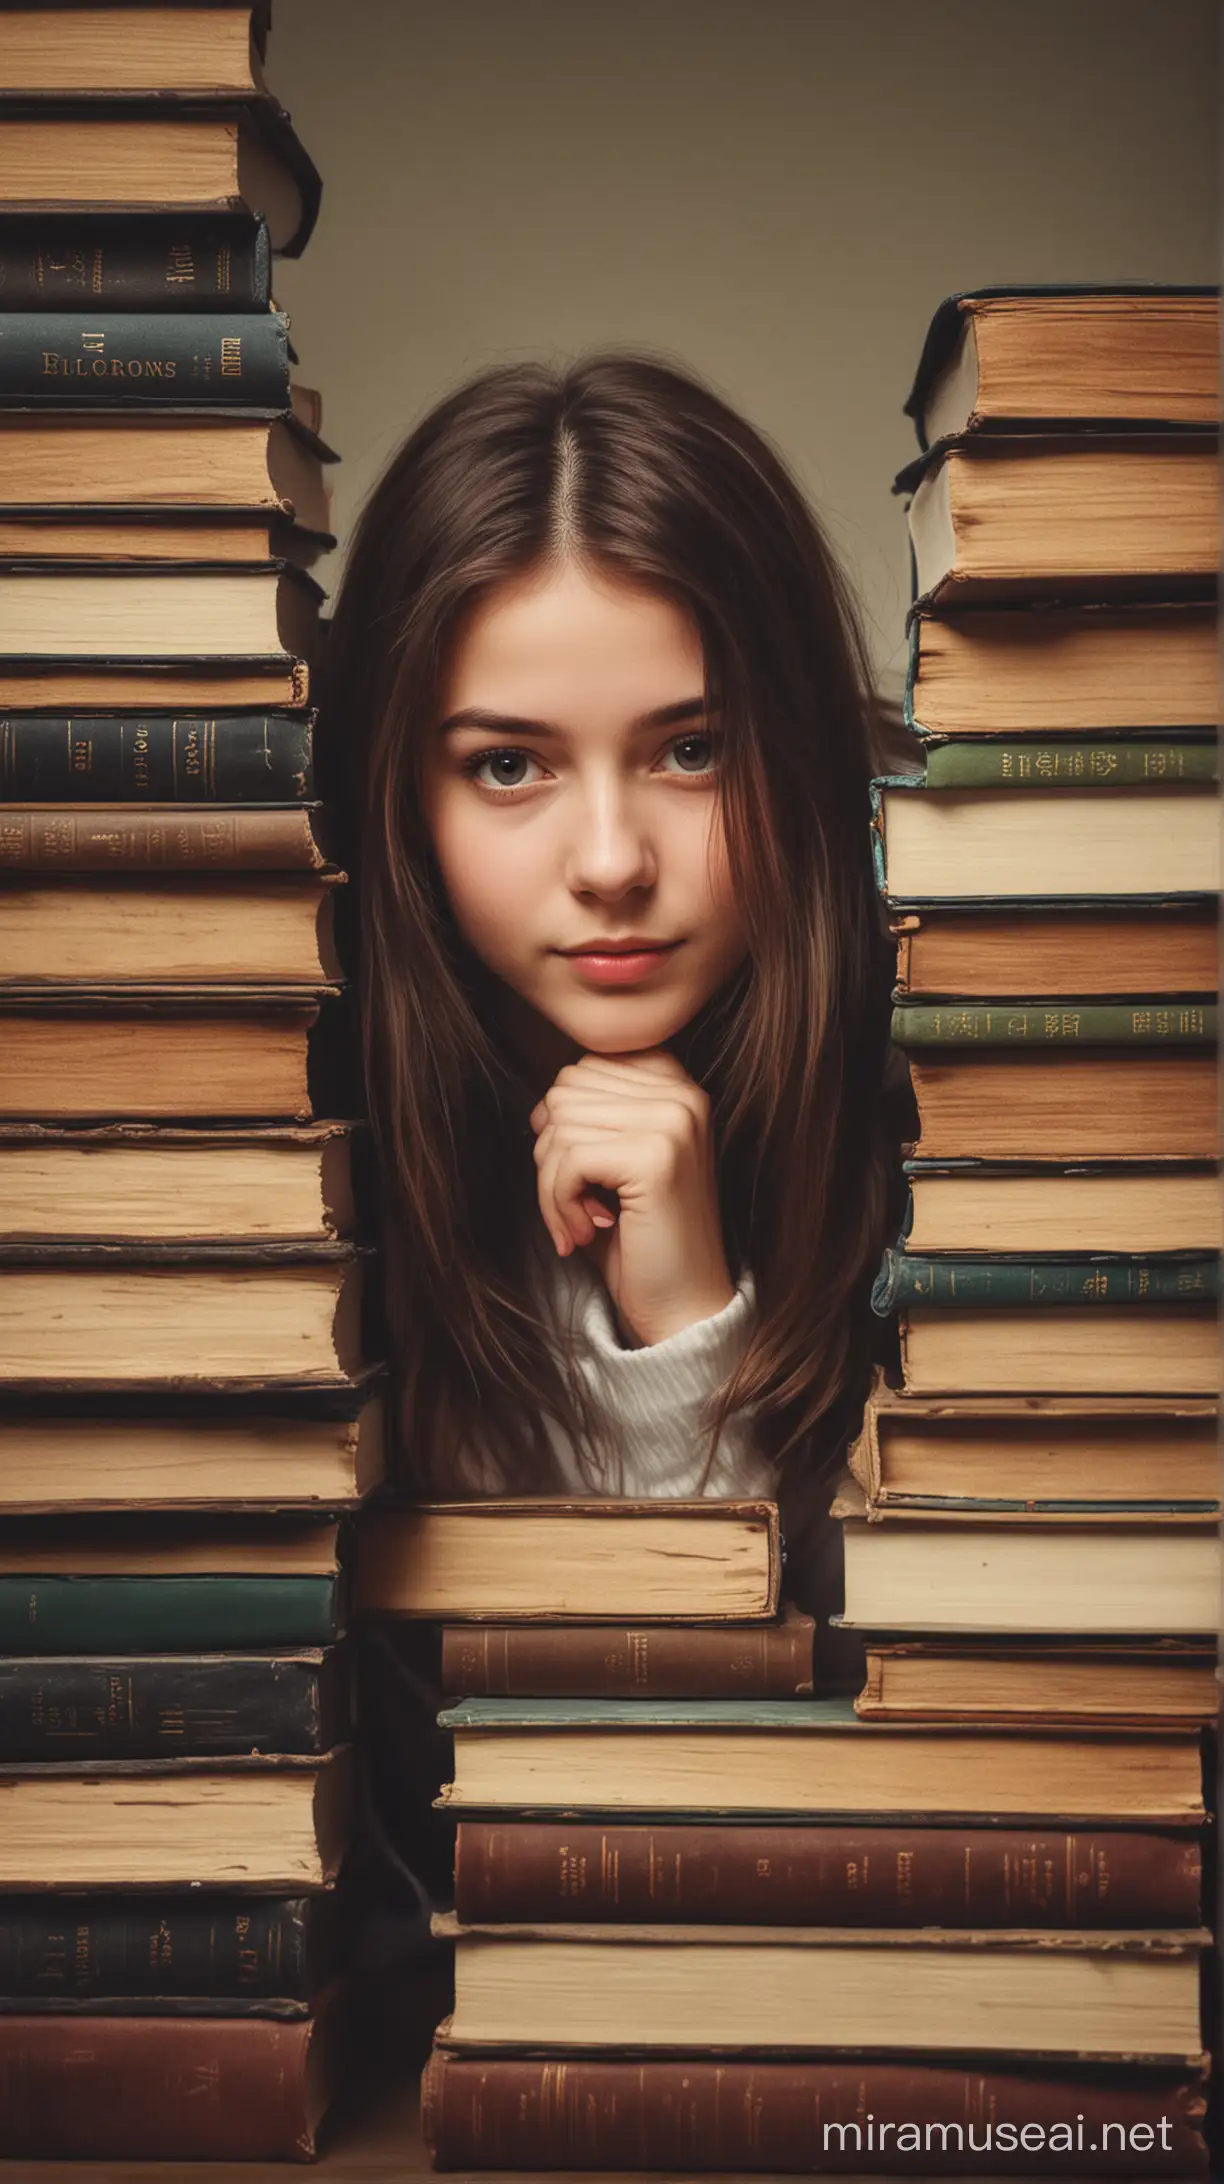 Young Girl Reading Books in a Cozy Library Setting